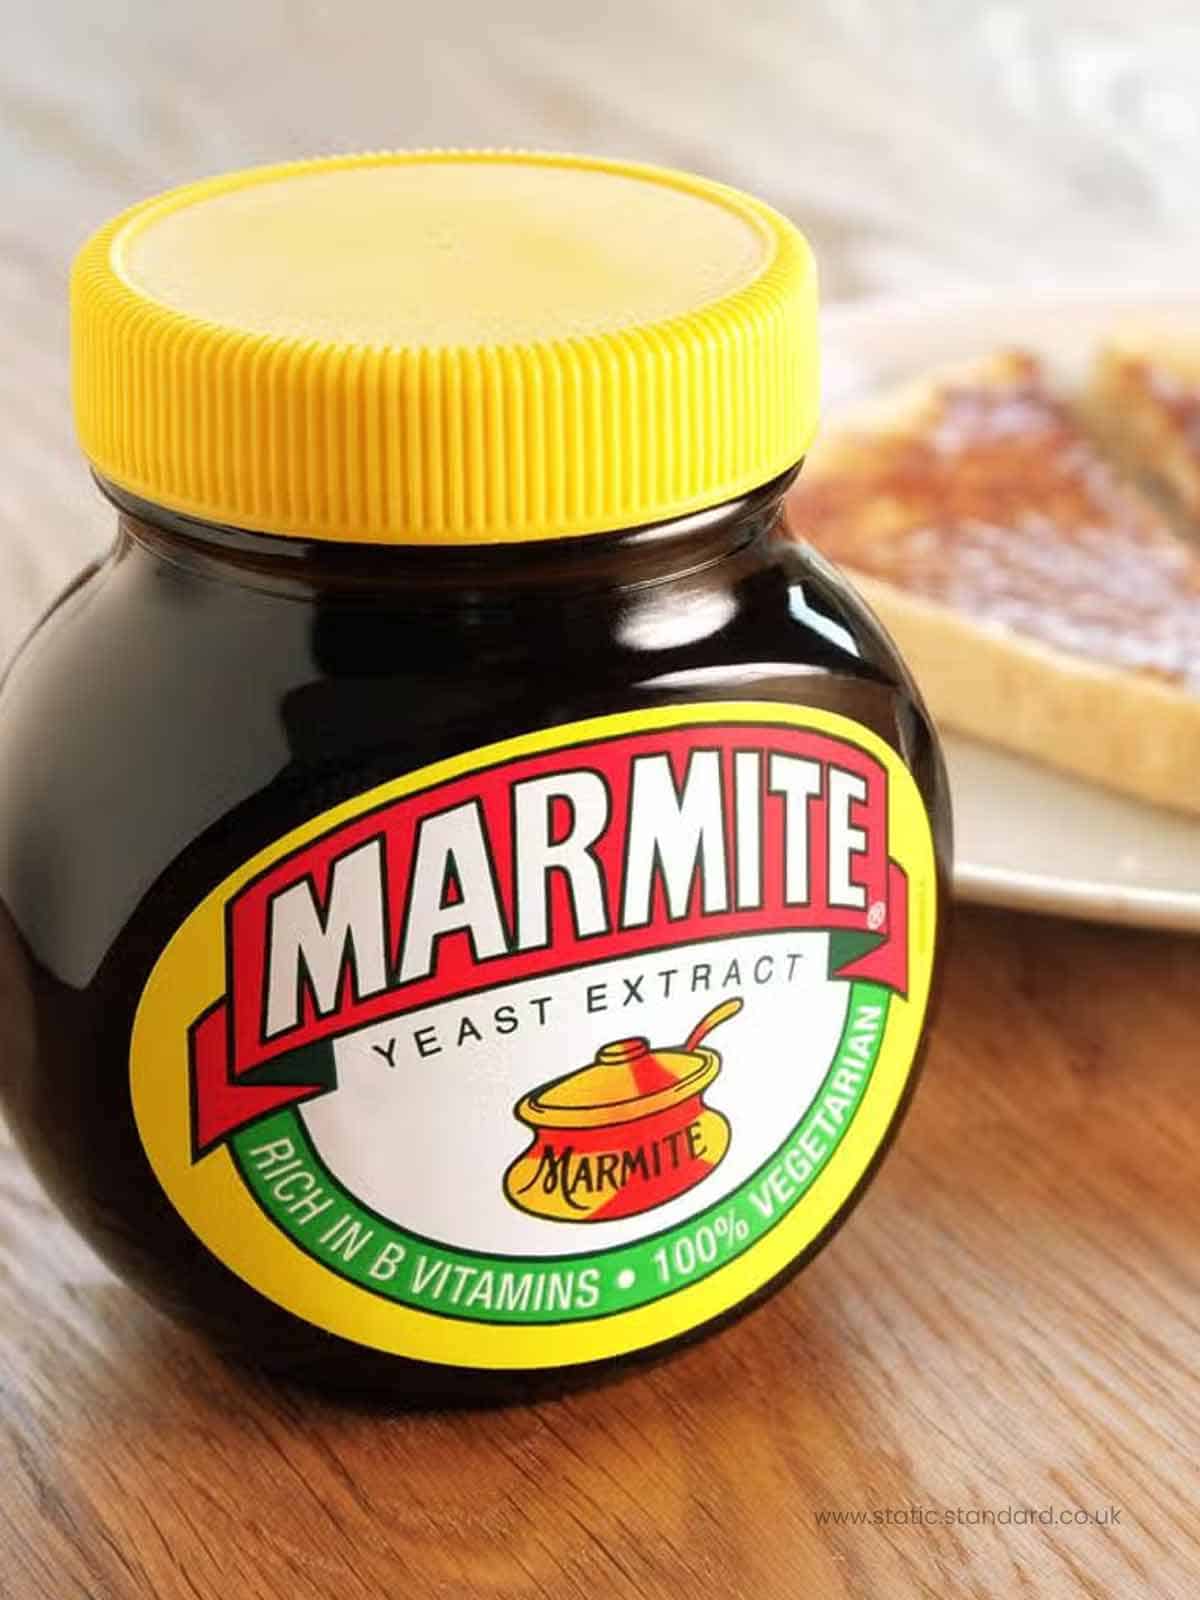 What is Marmite